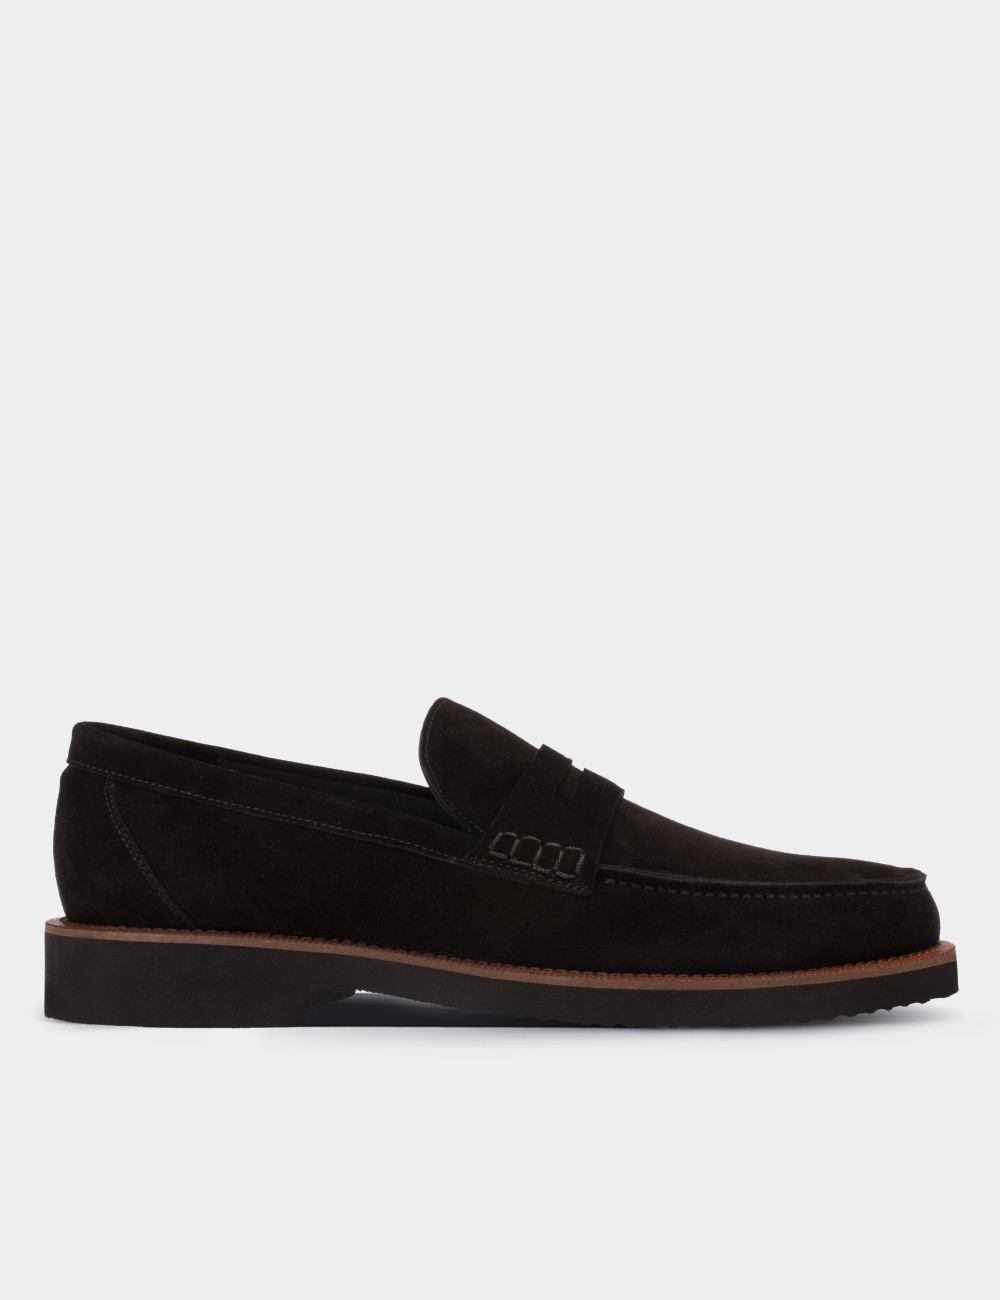 Black Suede Leather Loafers & Moccasins Shoes - 01538MSYHE09